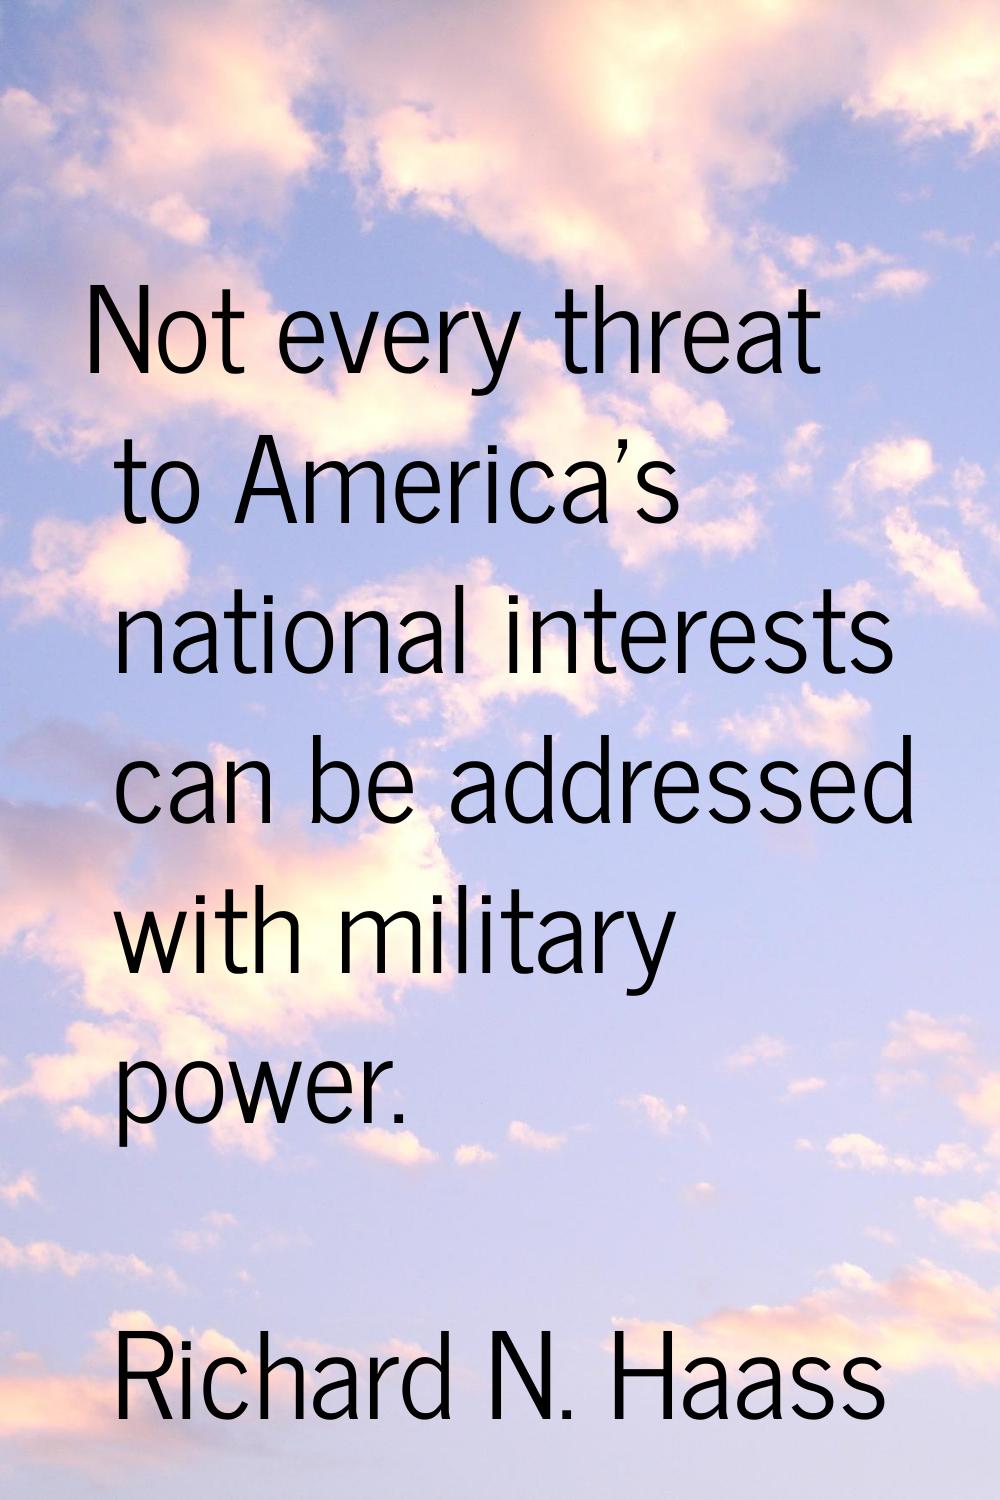 Not every threat to America's national interests can be addressed with military power.